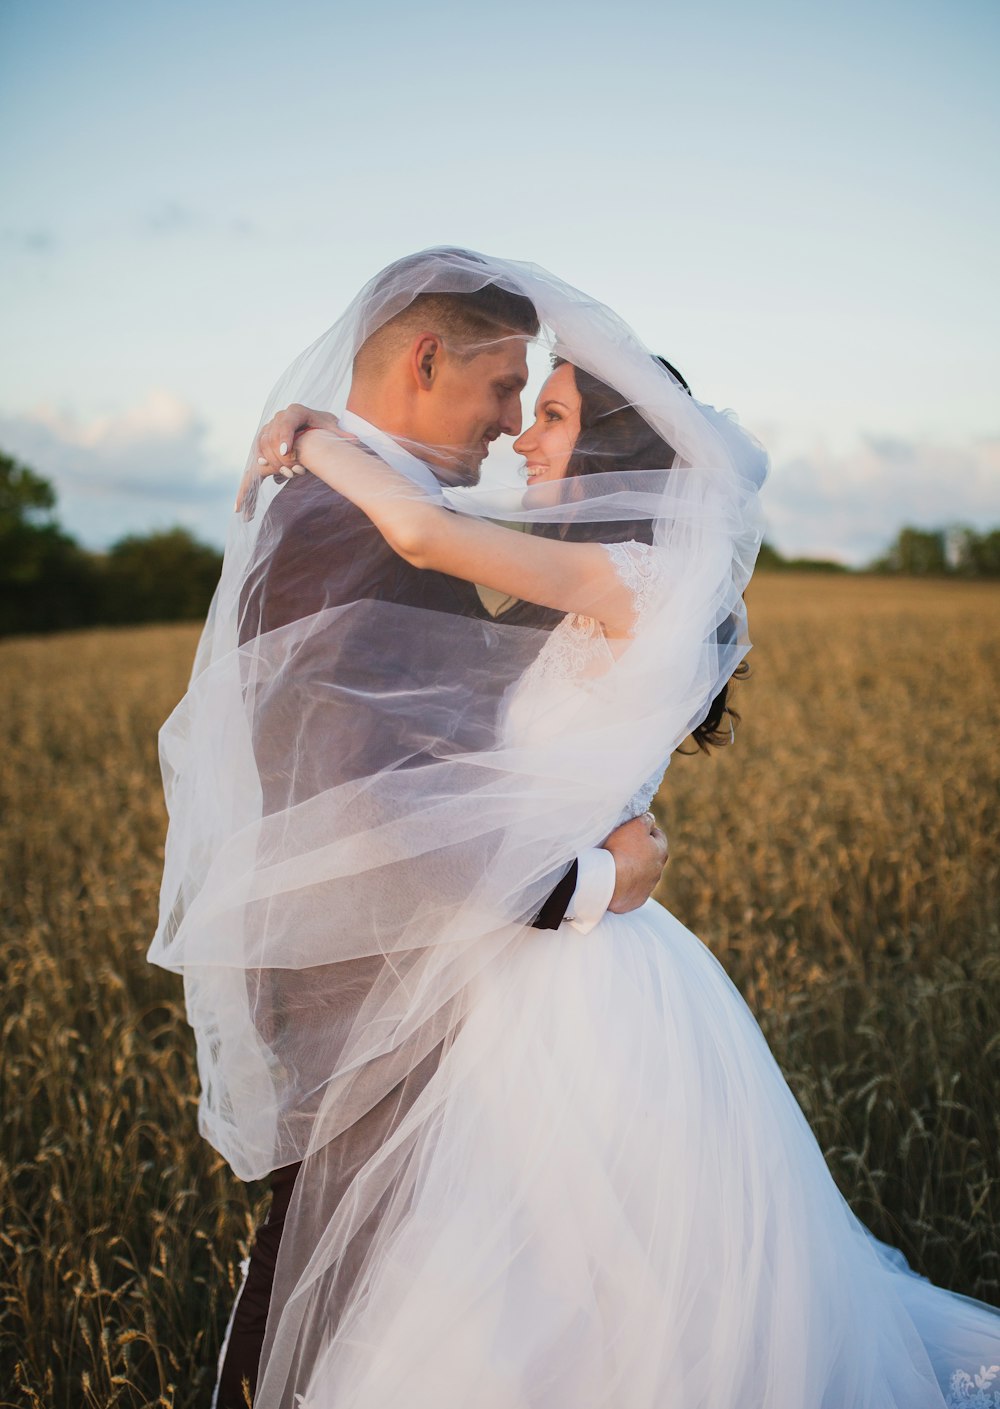 Smiling newly wed couple about to kiss in green field photo – Free ...